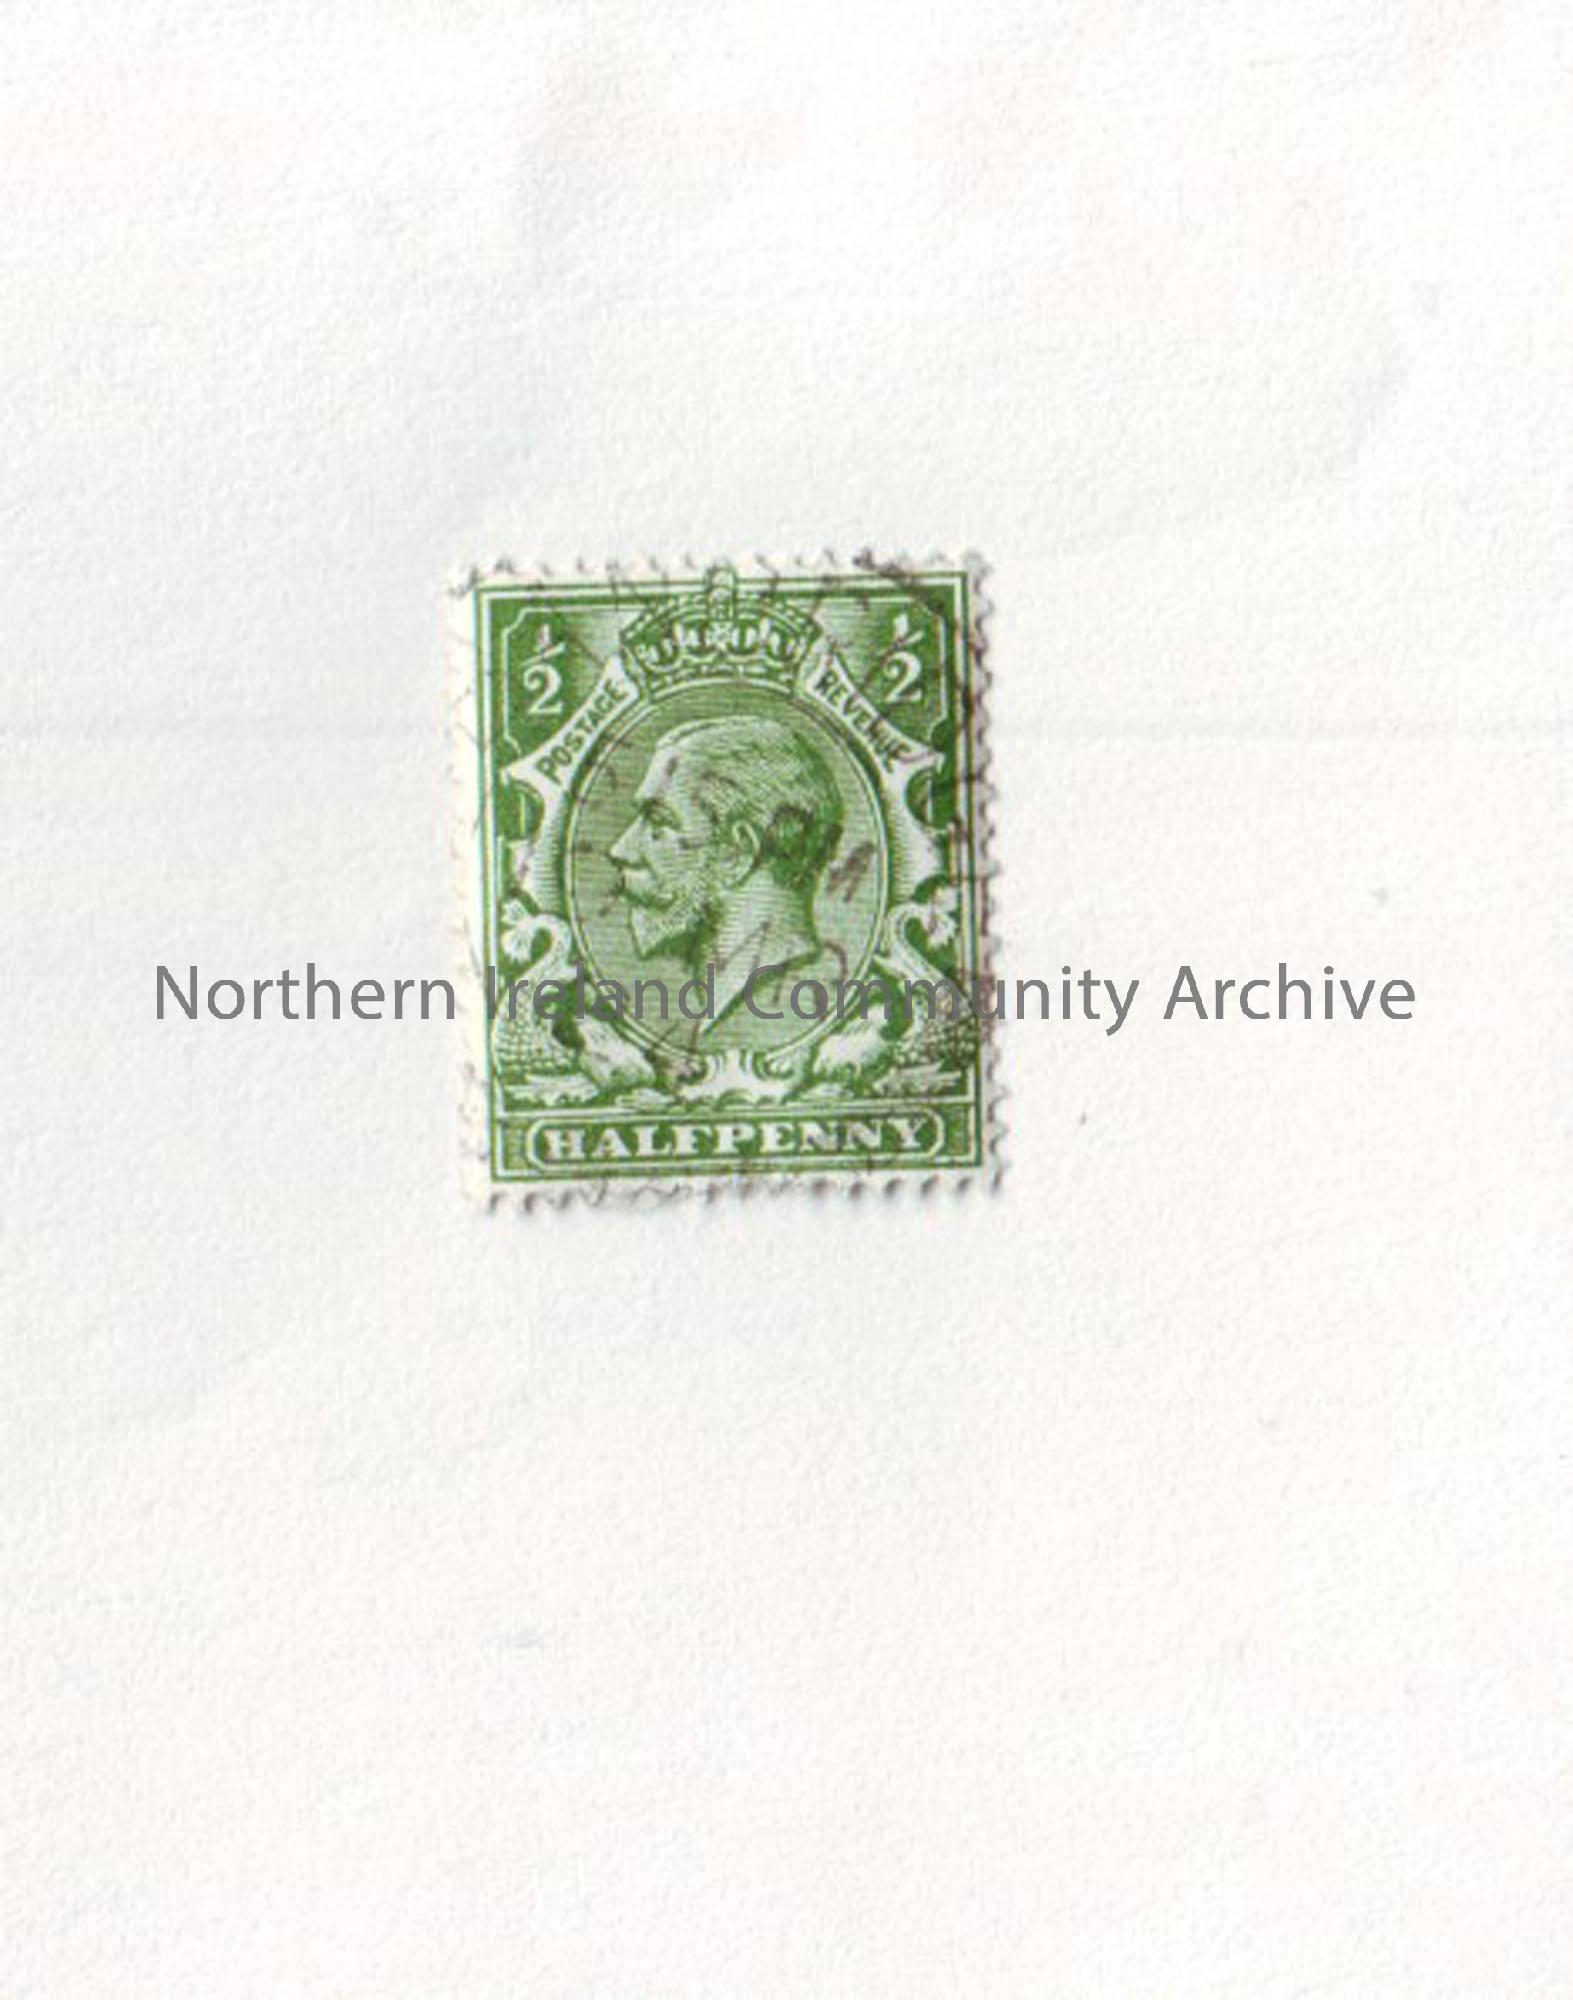 Half penny stamp dated 19th March 1924